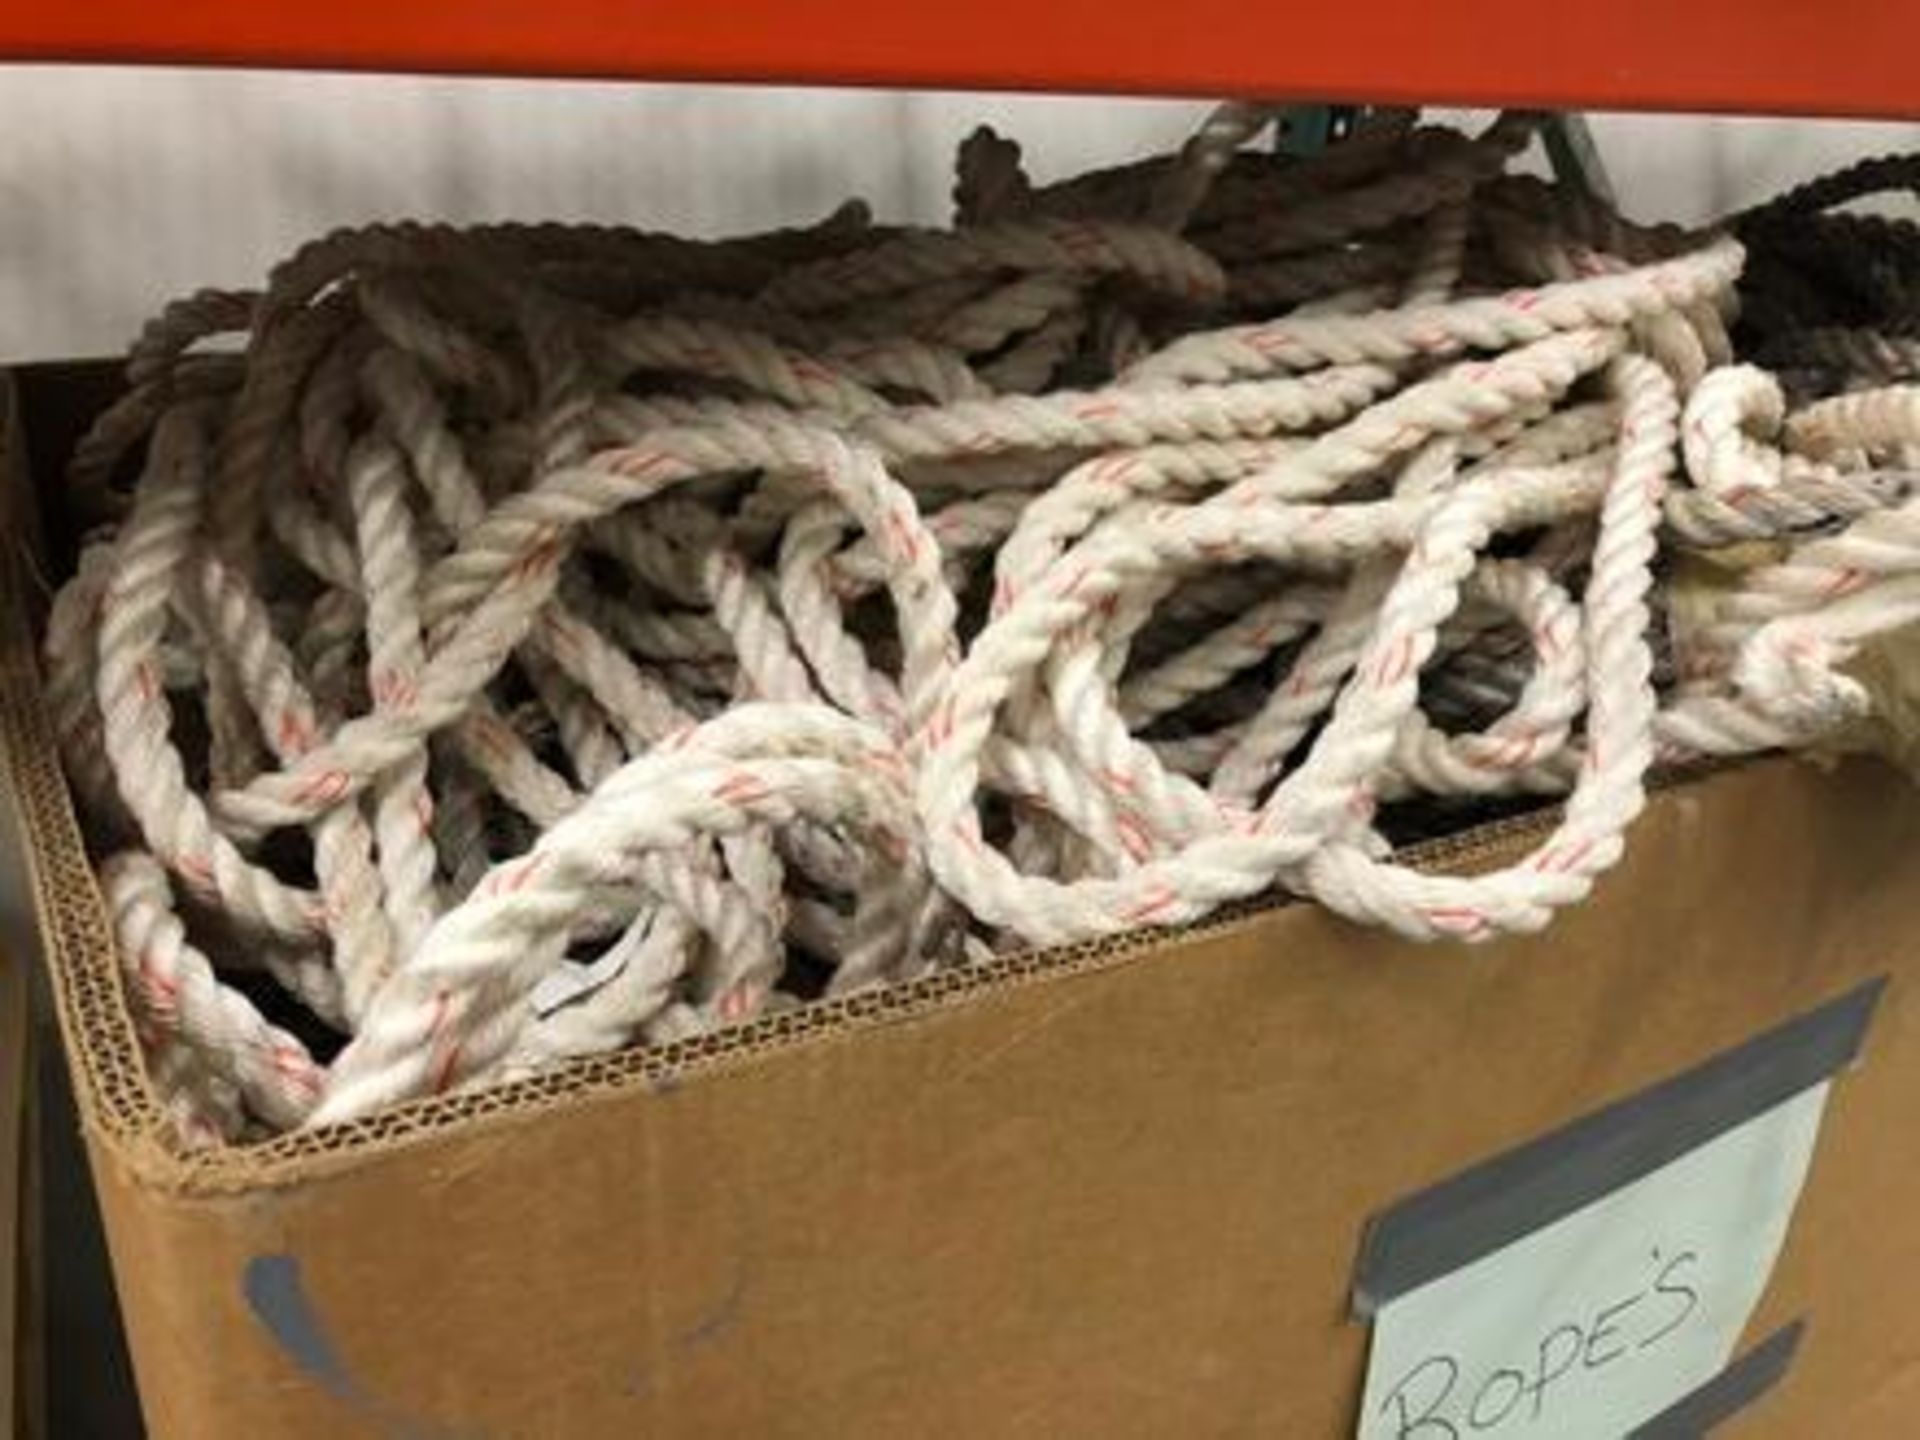 Large Quantity of Assorted Ropes in Box - Image 2 of 6